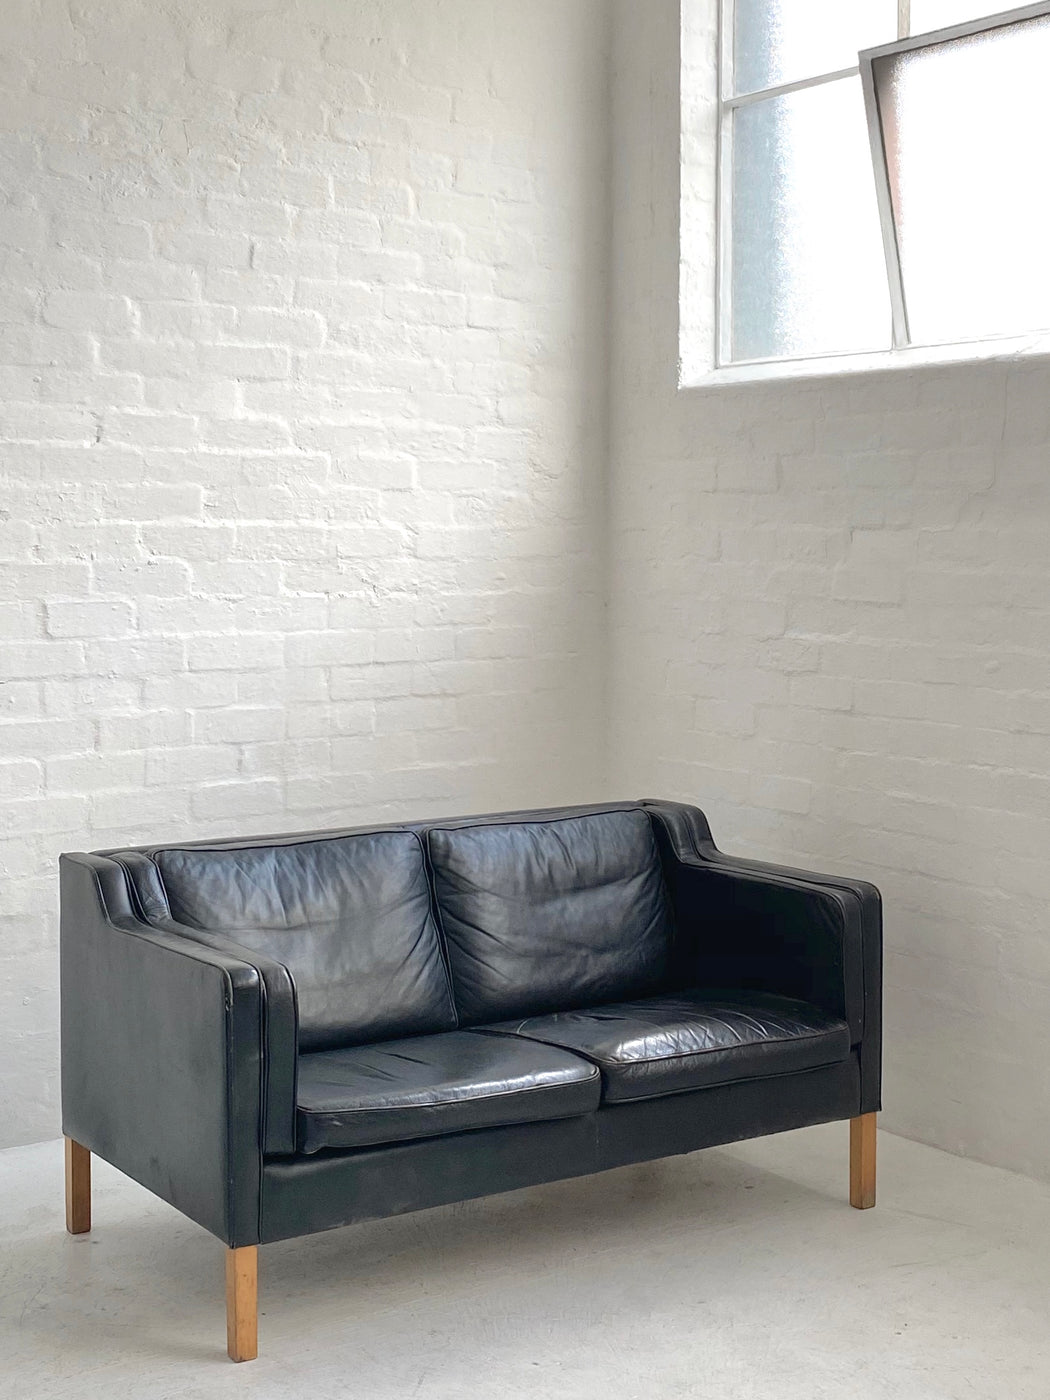 Stouby 'Eva' Leather Sofa with repairs